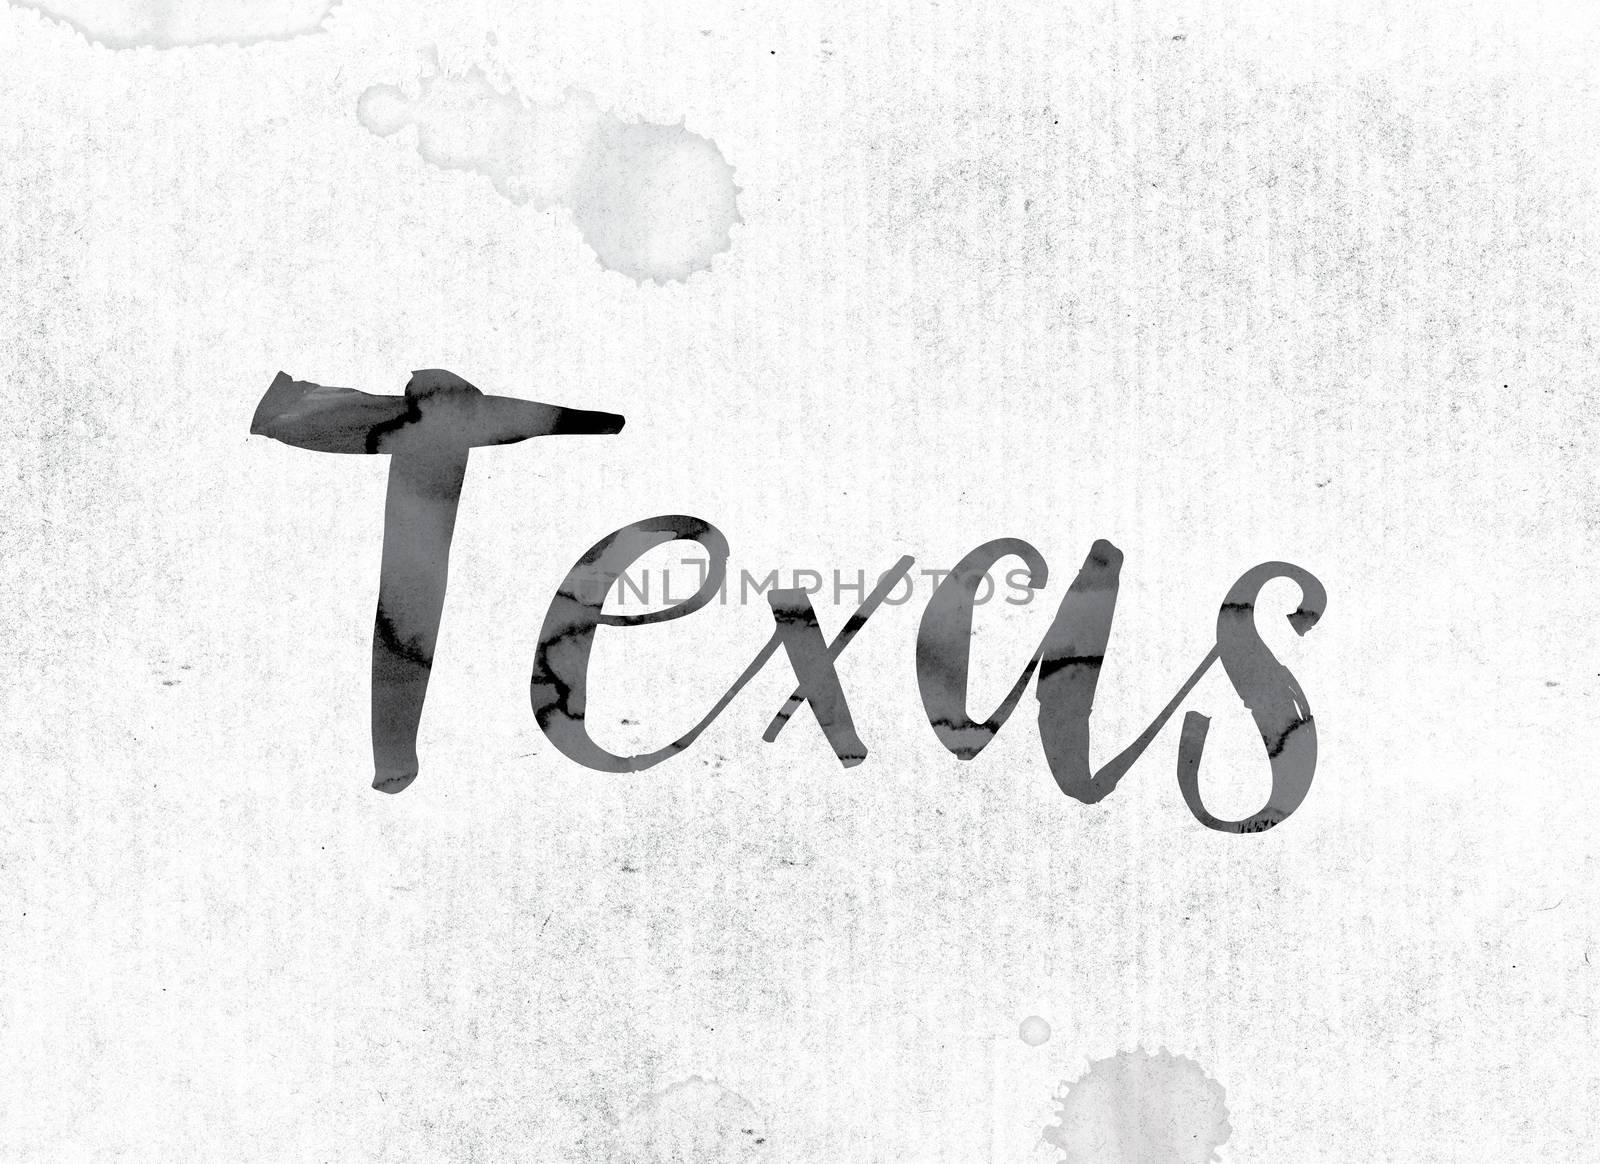 The word "Texas" concept and theme painted in watercolor ink on a white paper.